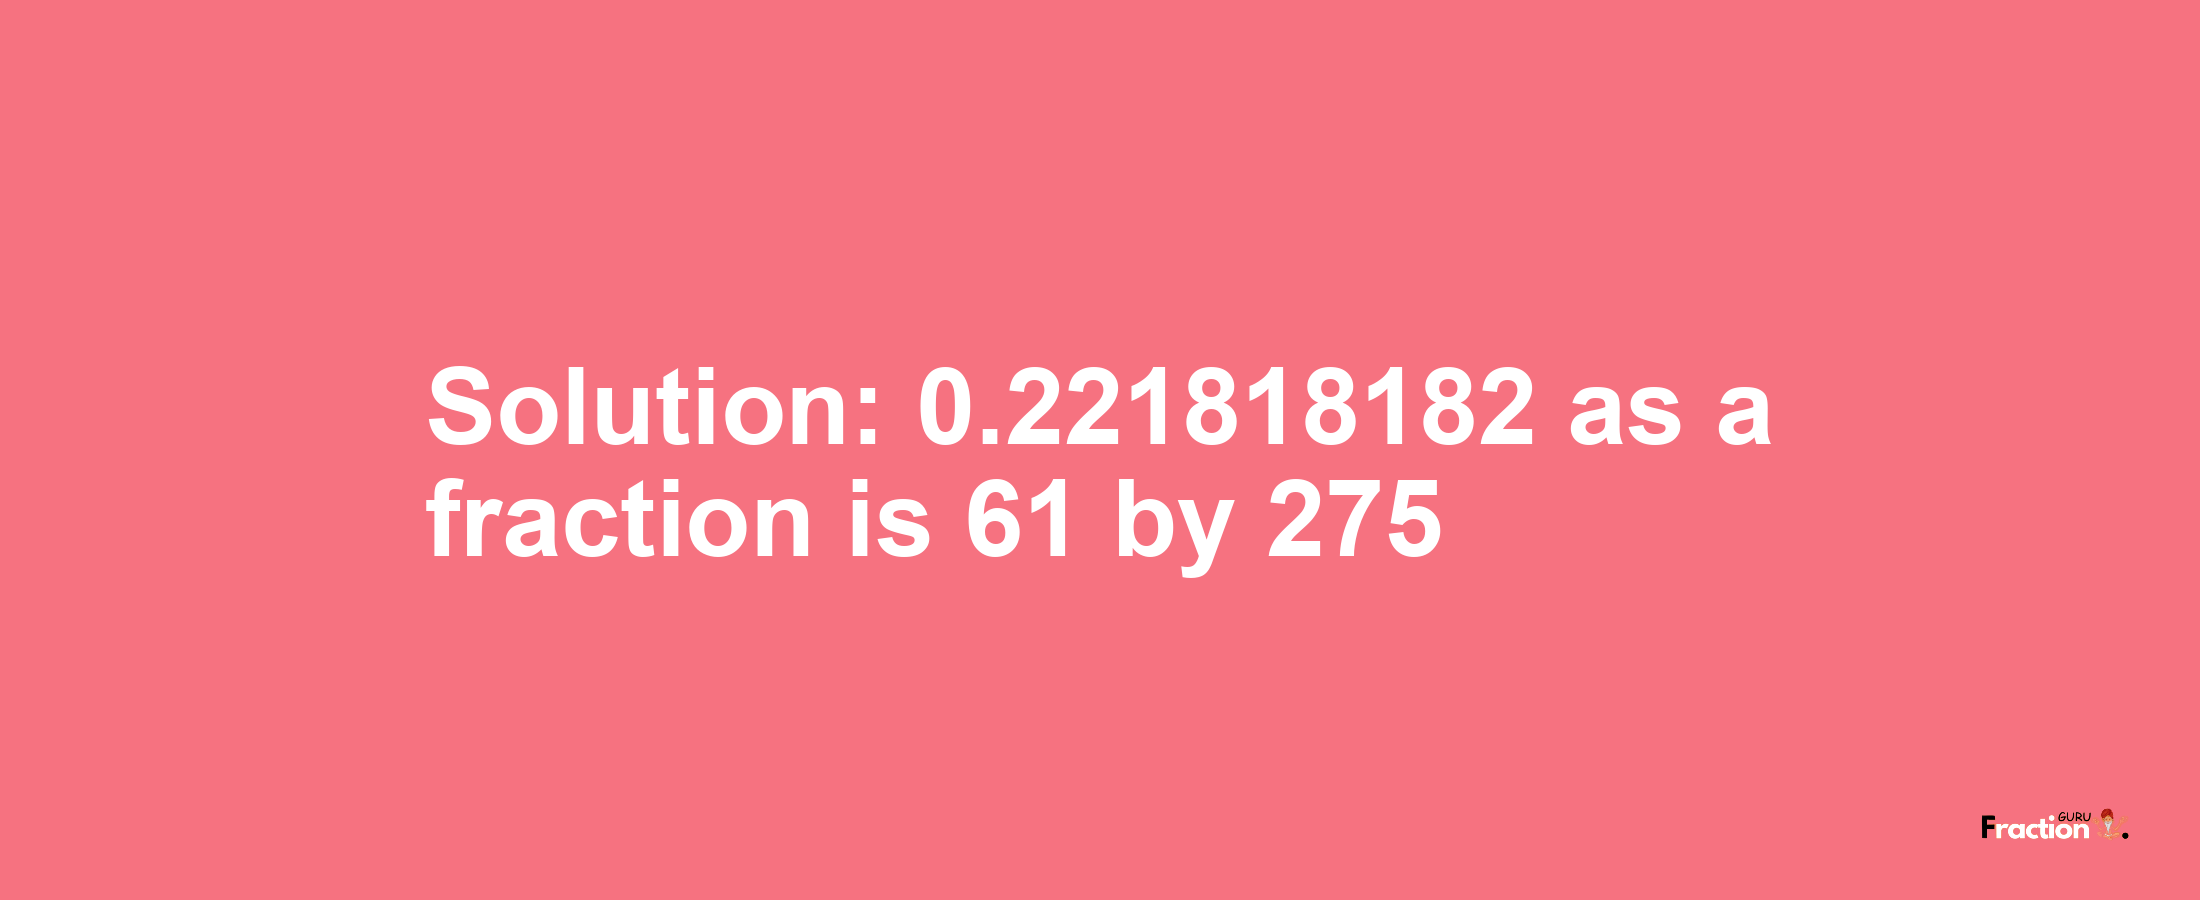 Solution:0.221818182 as a fraction is 61/275